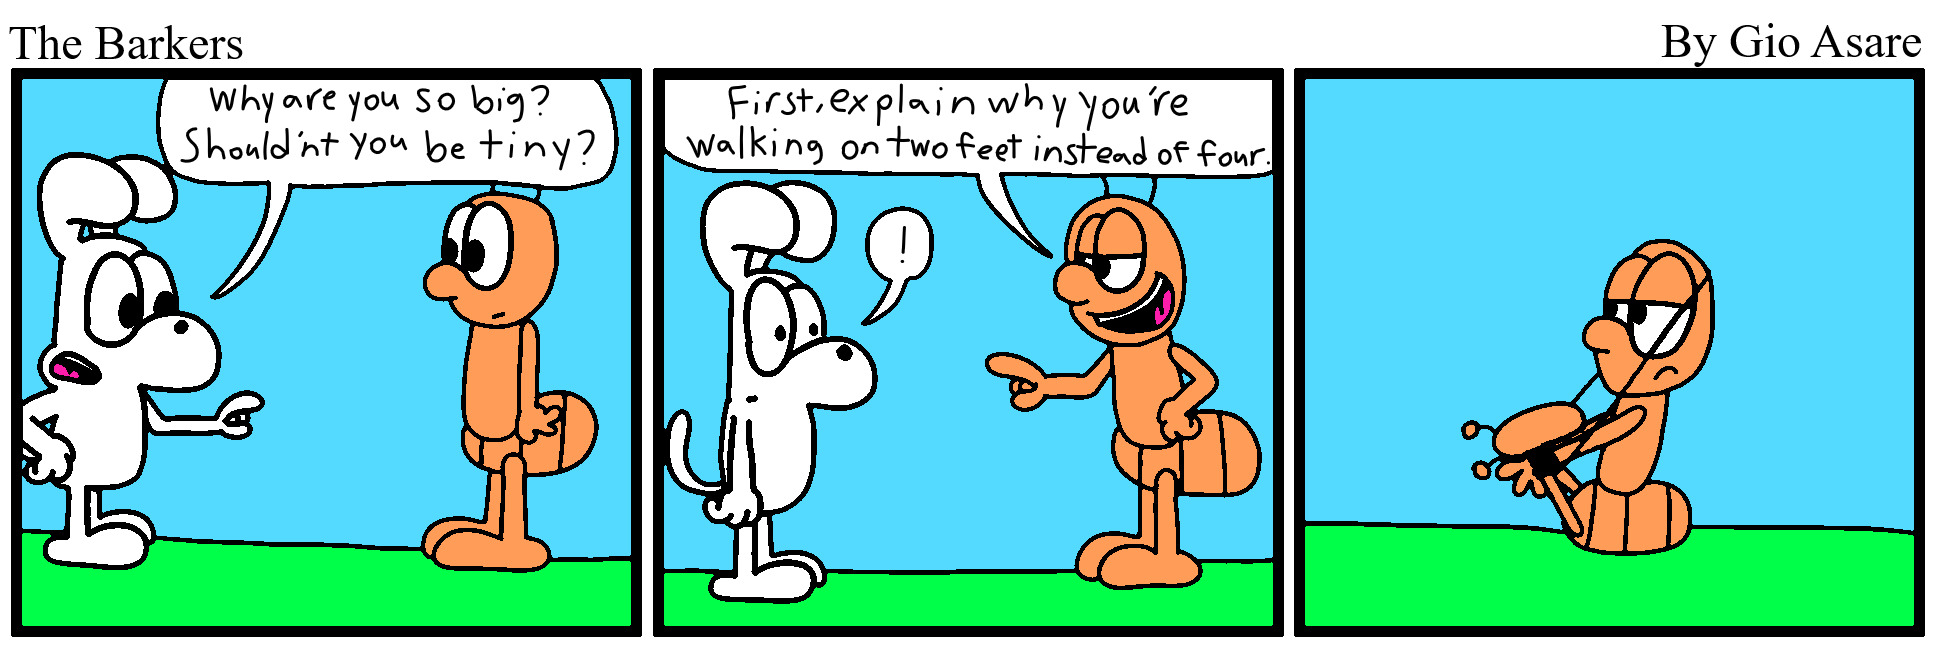 New “The Barkers” Comic Strip Introducing A New Character.